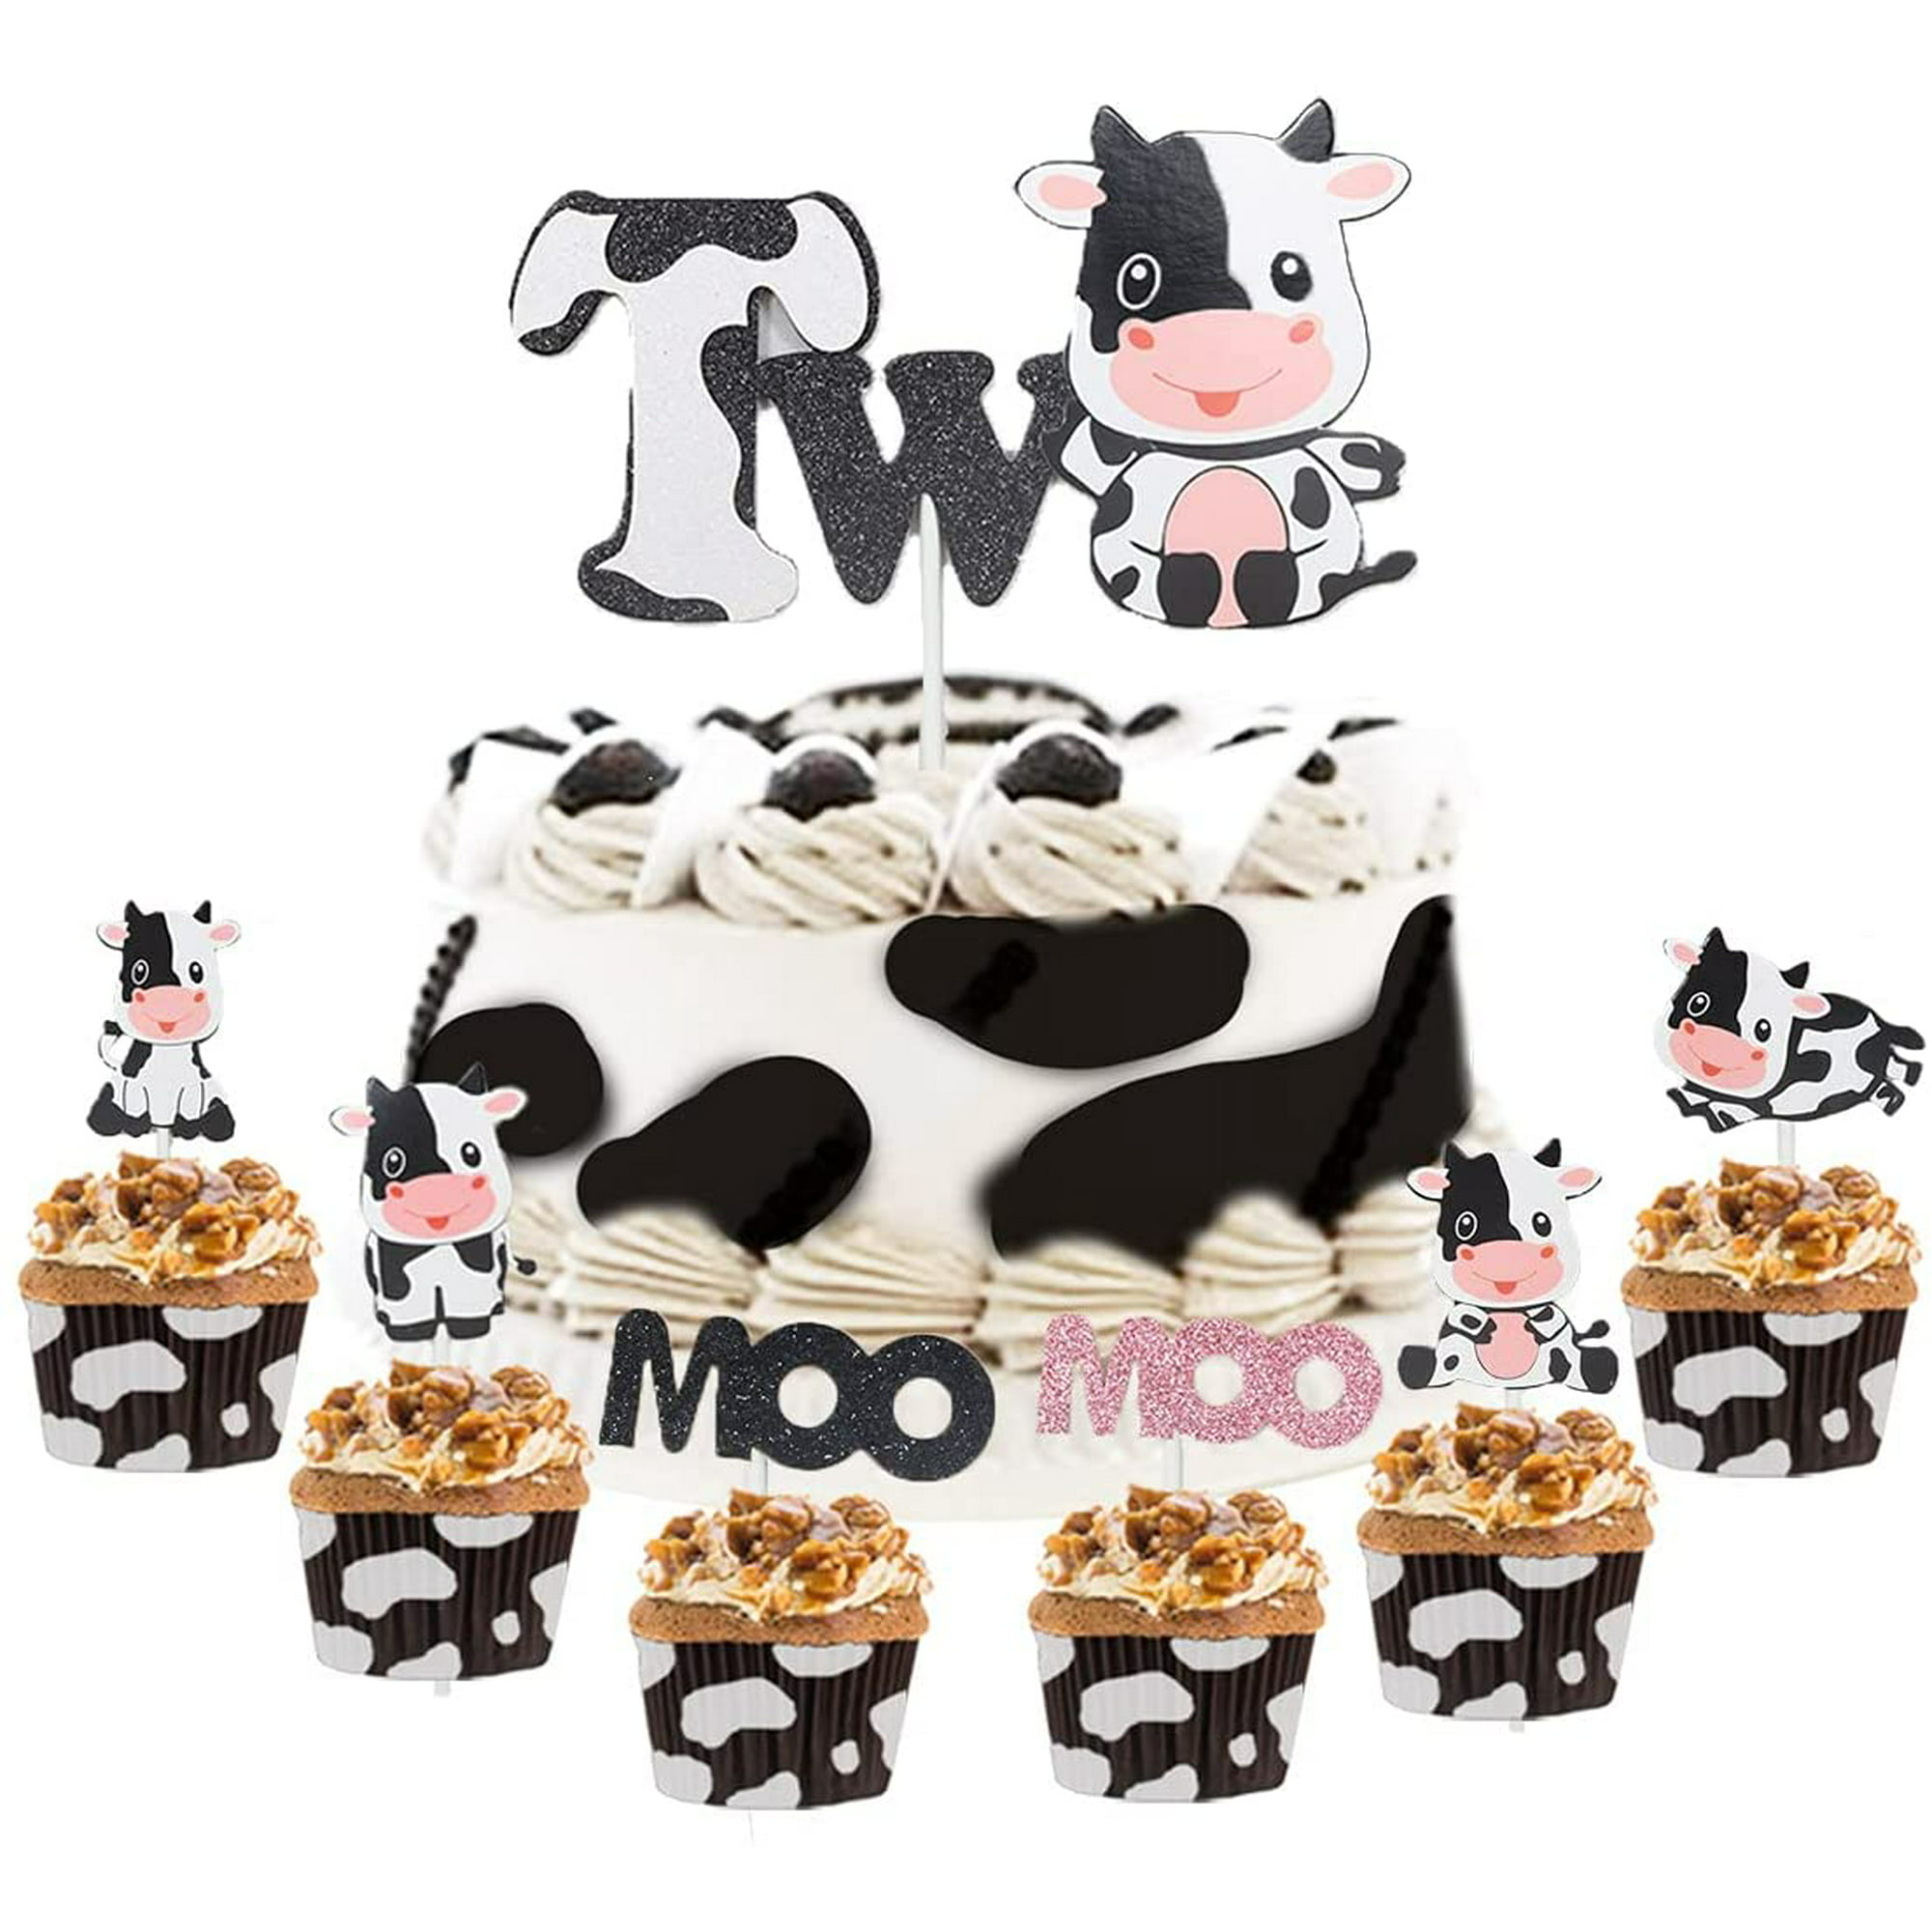 Cow 2nd Birthday Cake Topper - Barnyard Cake Decorations, Farm Animal  Cupcake Toppers for Two Year Old Boys Girls Birthday Party Supplies 25Pcs  with Moo and Milk Cow Sign | Walmart Canada